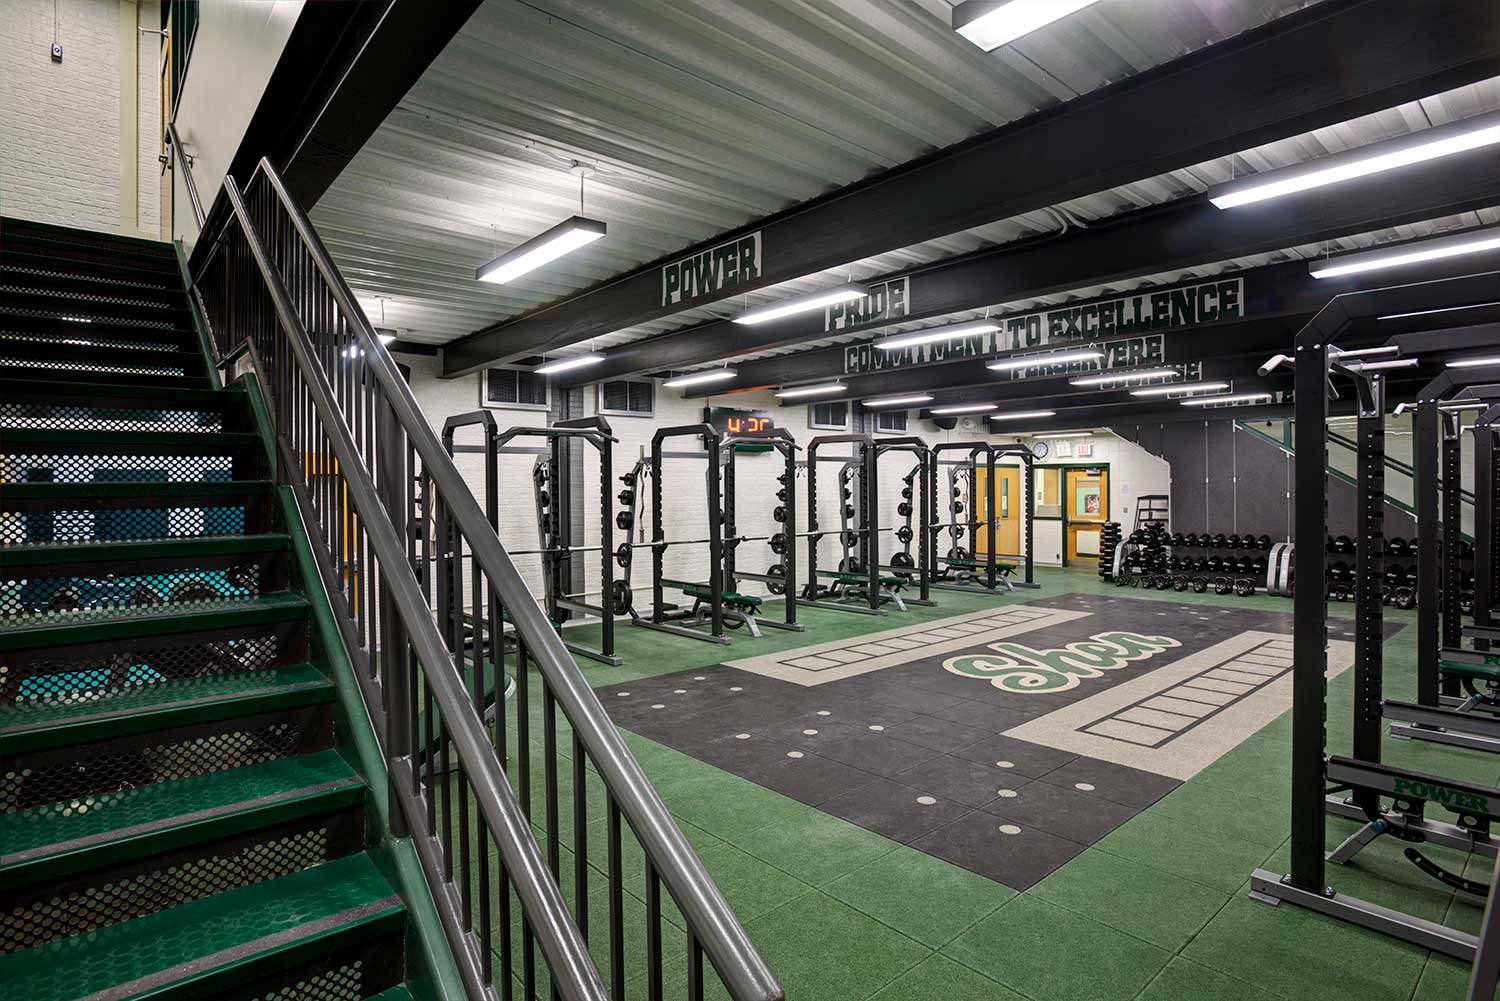 View from the stairwell of the new fitness center weight and exercise room in the athletic complex designed by Mosaic Associates Architects for Shenendehowa Central School District.